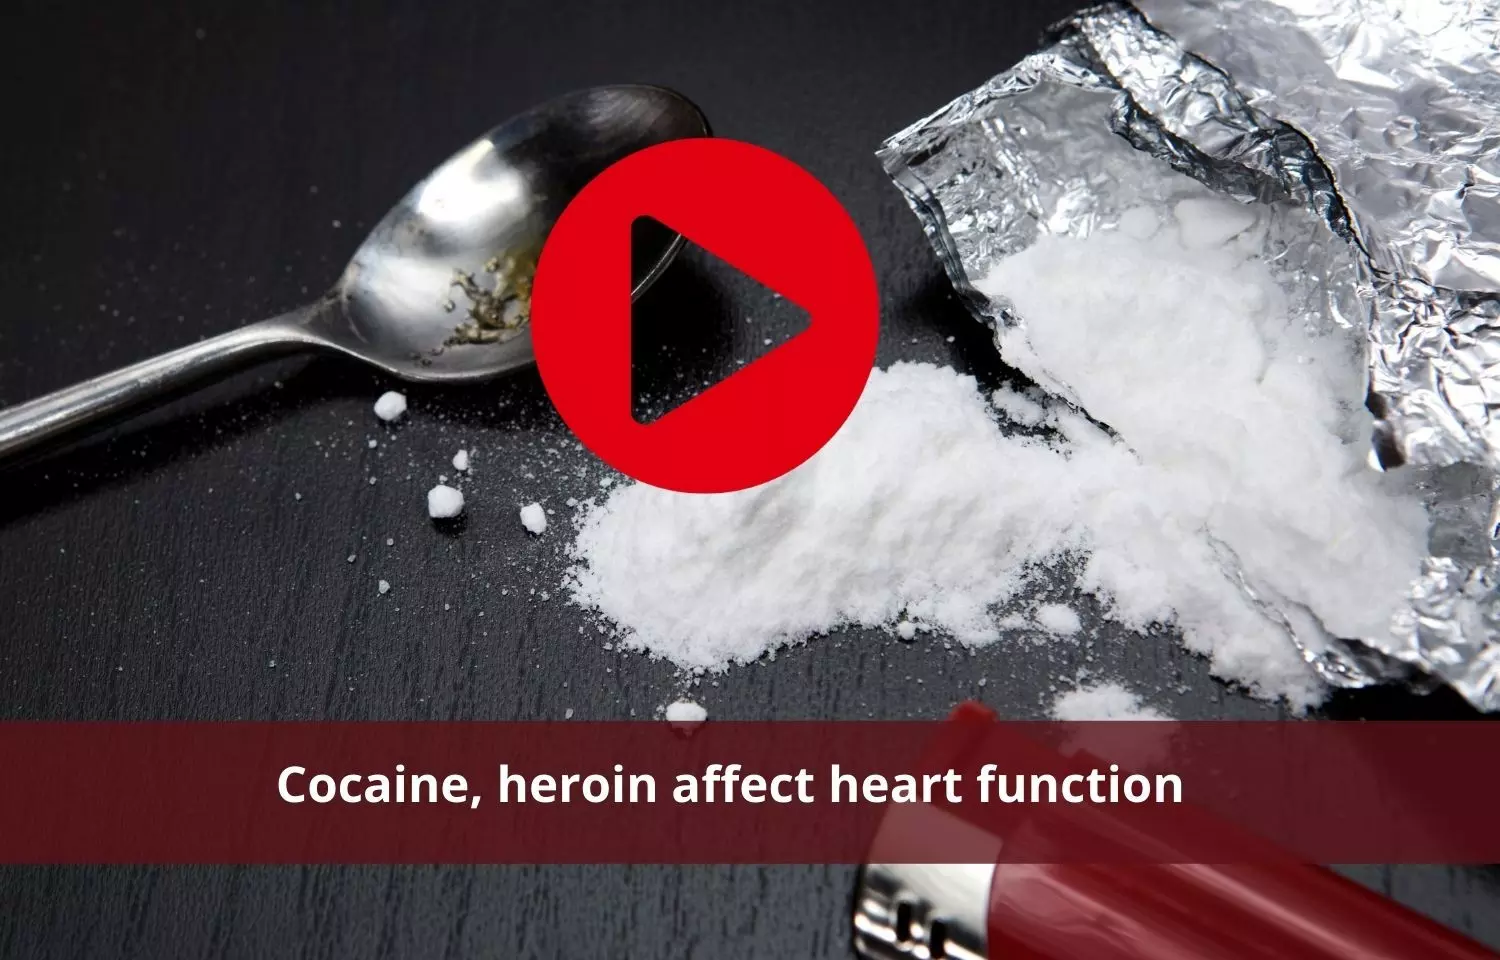 Cocaine, heroin to affect heart function in addicts